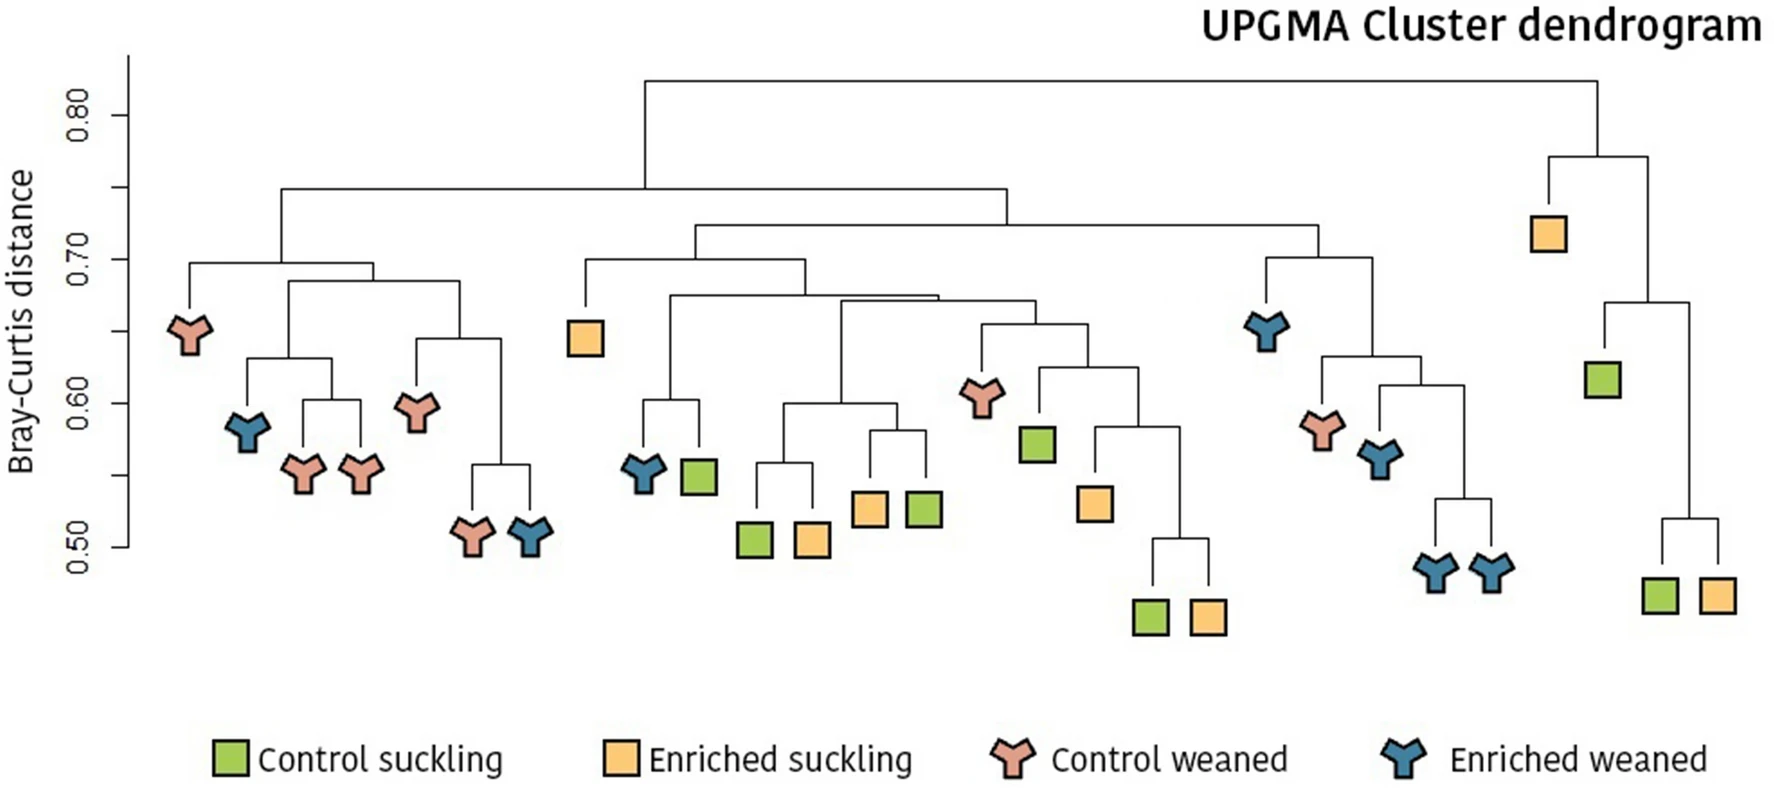 Early socialization and environmental enrichment of lactating piglets affects the caecal microbiota and metabolomic response after weaning